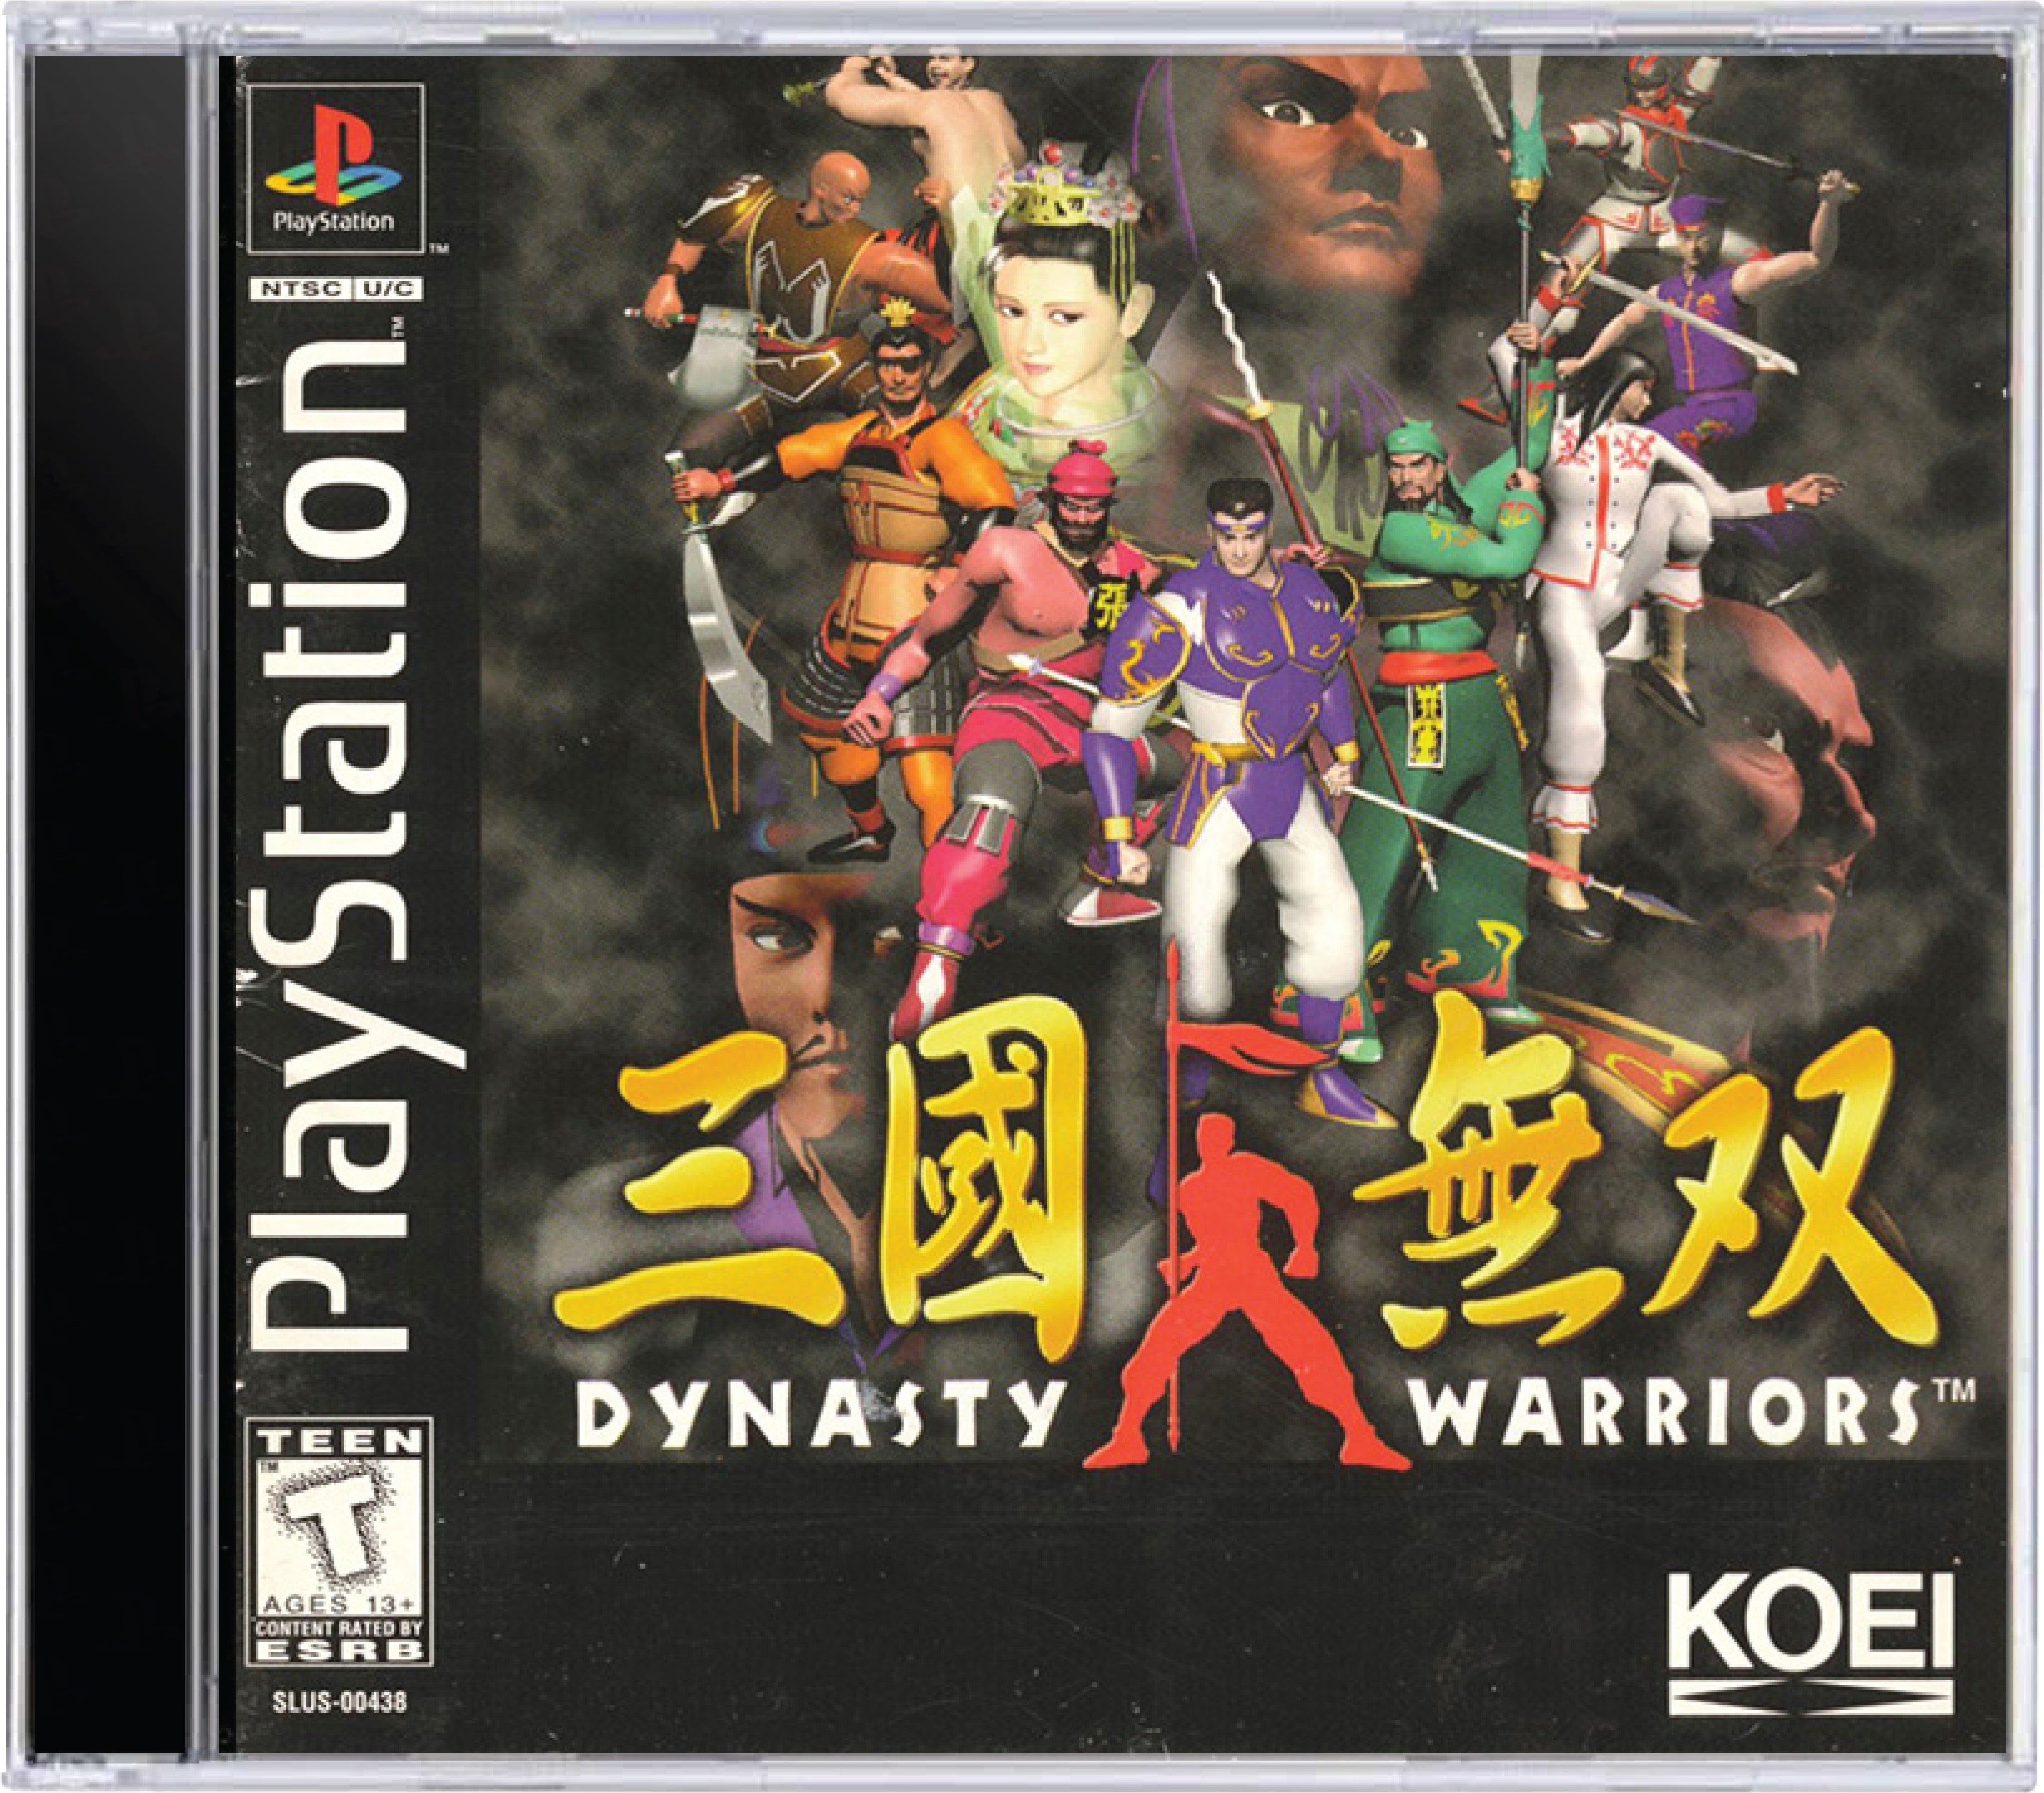 Dynasty Warriors Cover Art and Product Photo